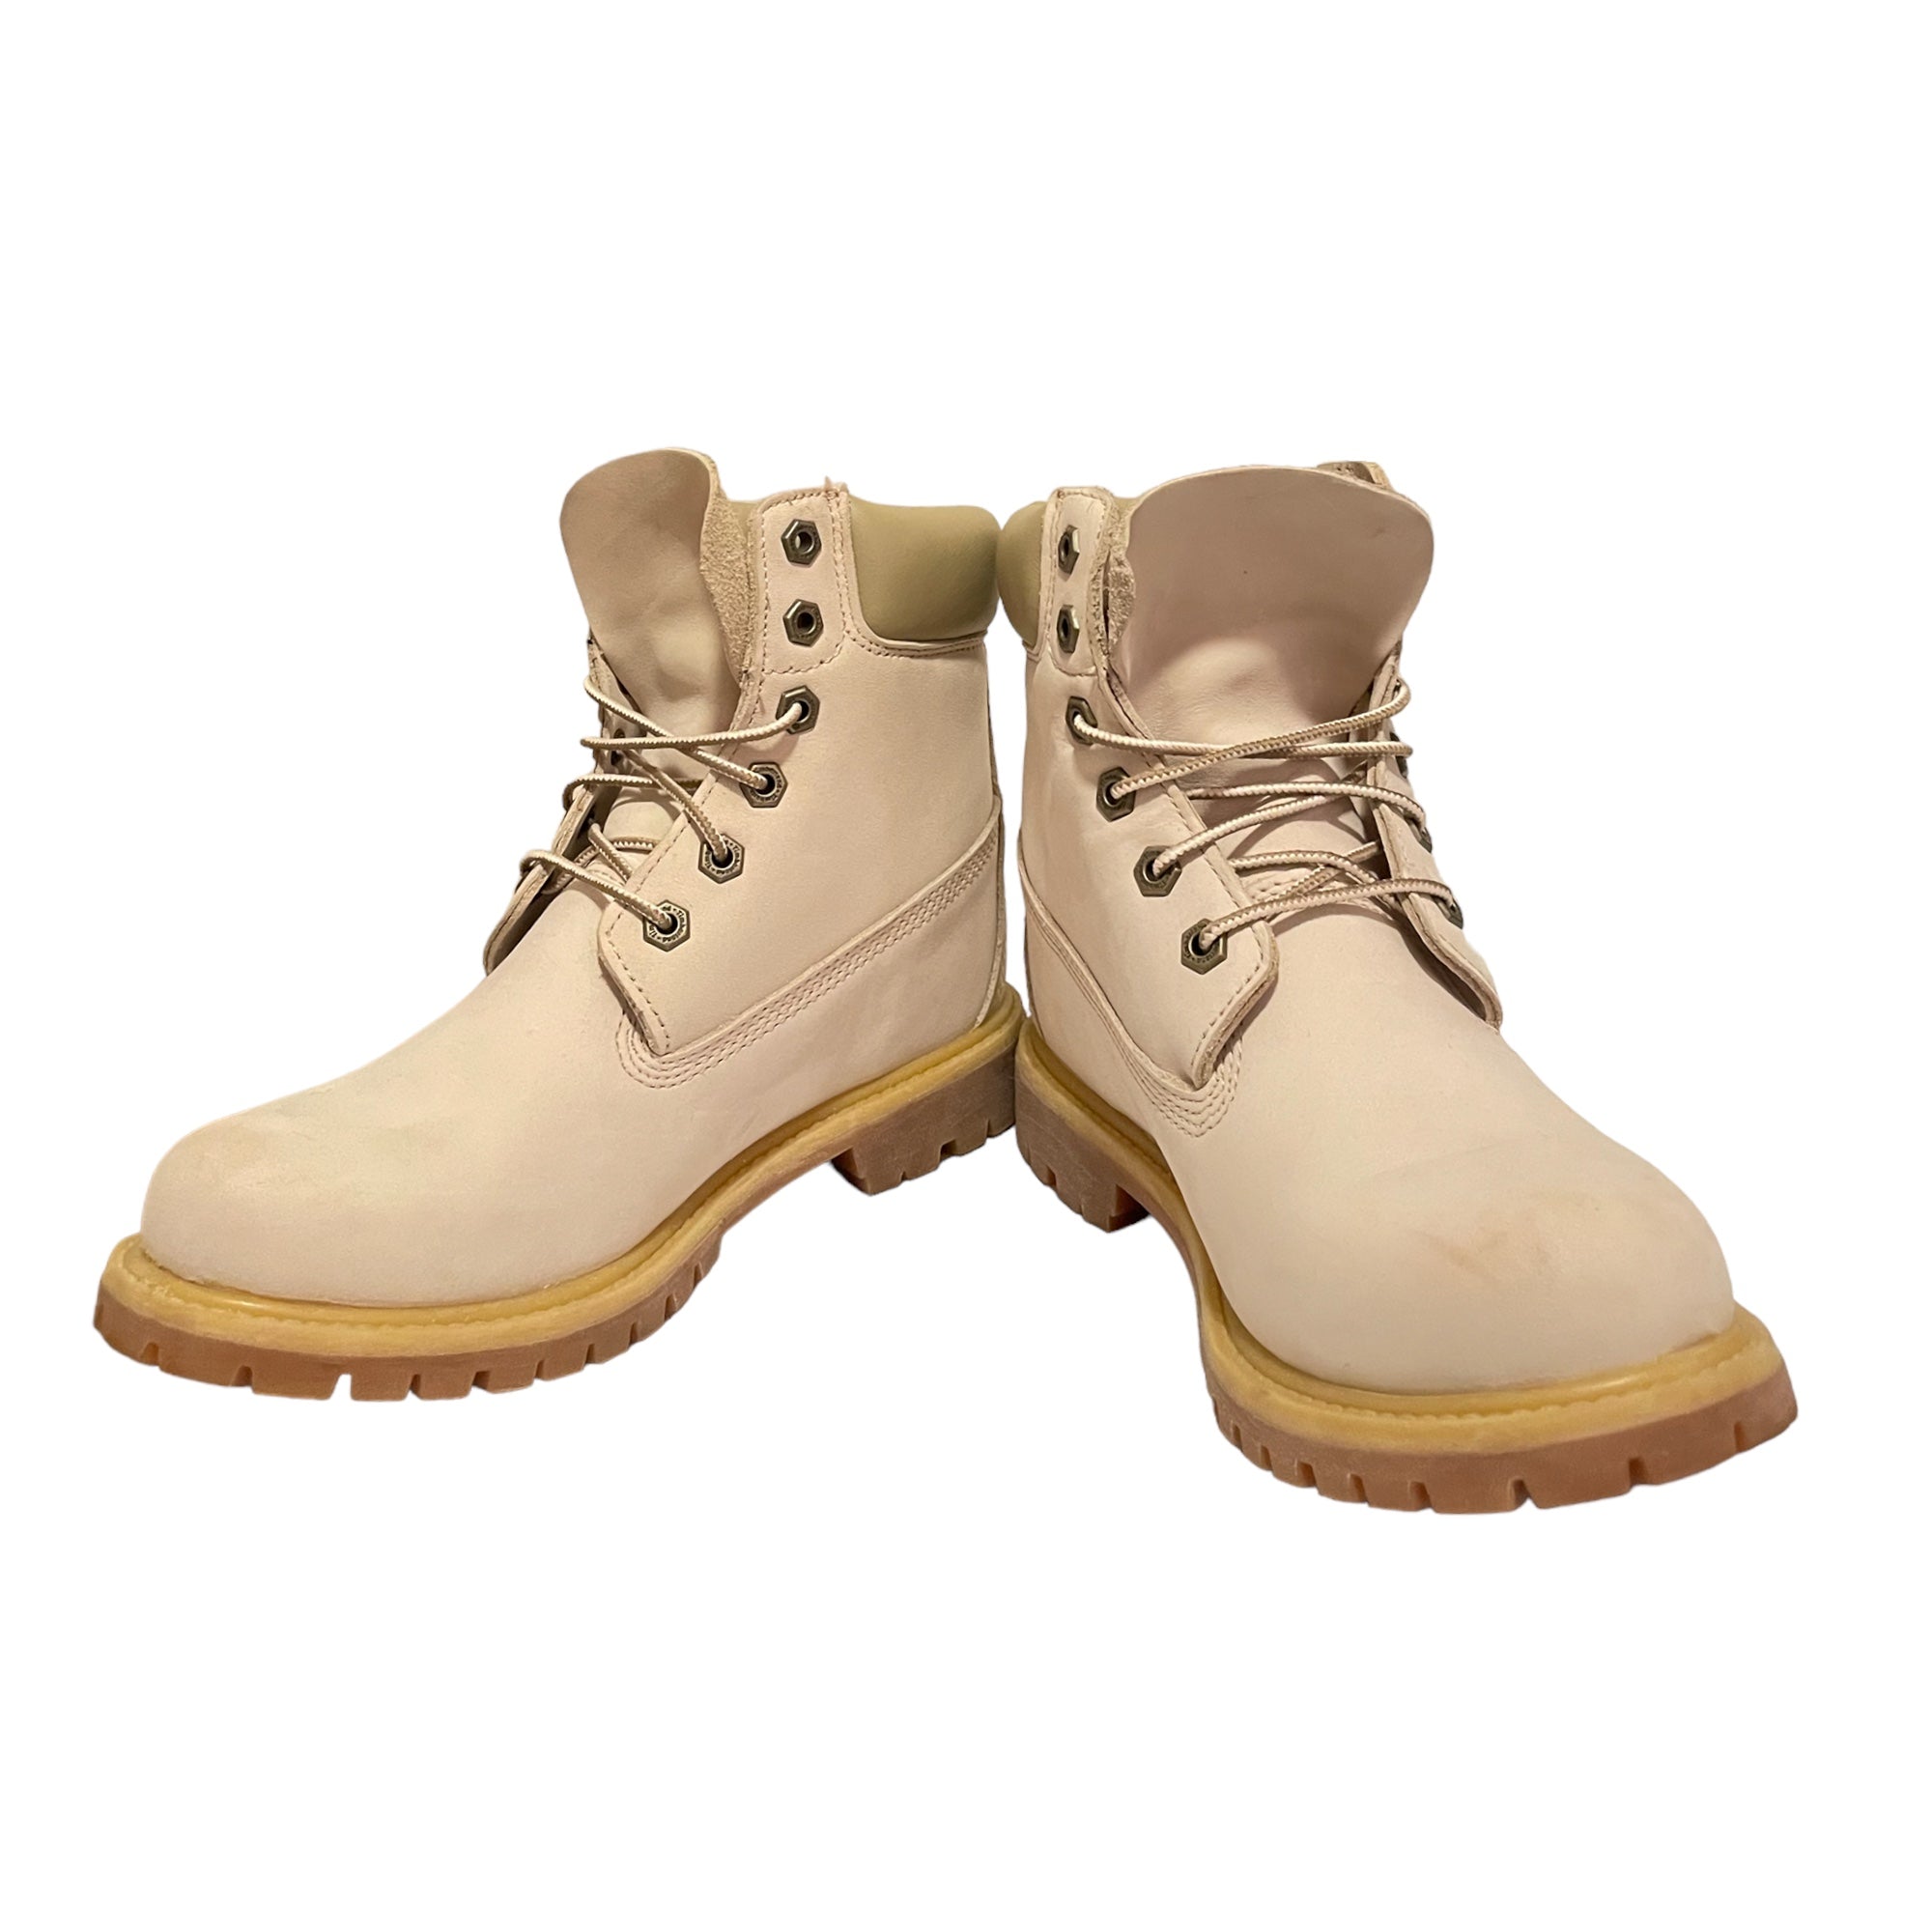 Women’s TIMBERLAND BOOTS Bone Color |Size: 7.5|